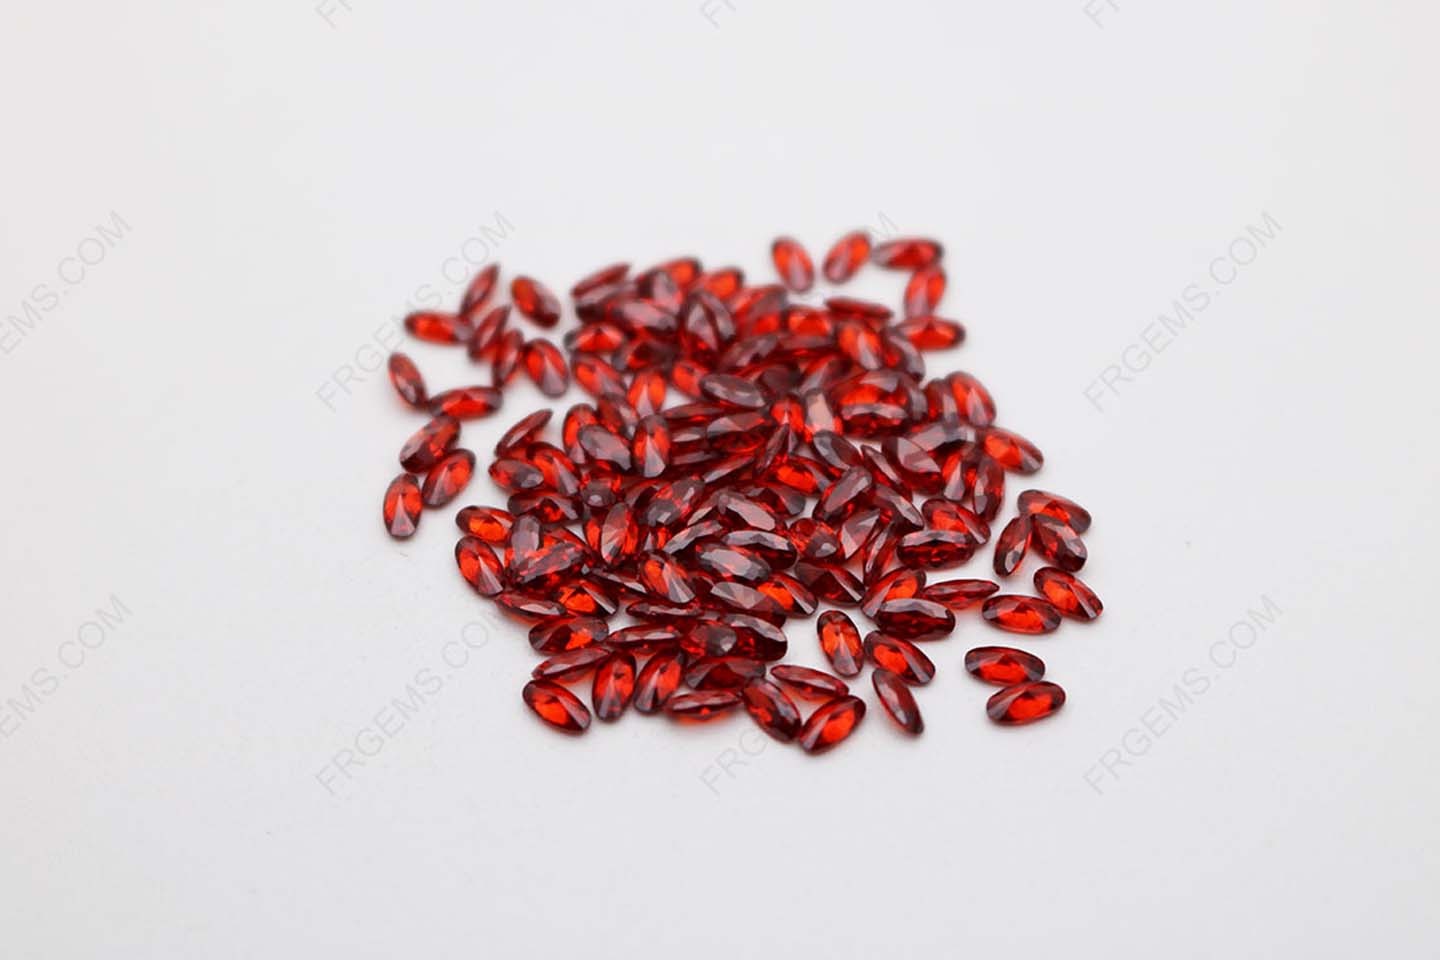 Cubic Zirconia Garnet Red Oval Shape Faceted cut 4x2mm stones CZ22 IMG_1031